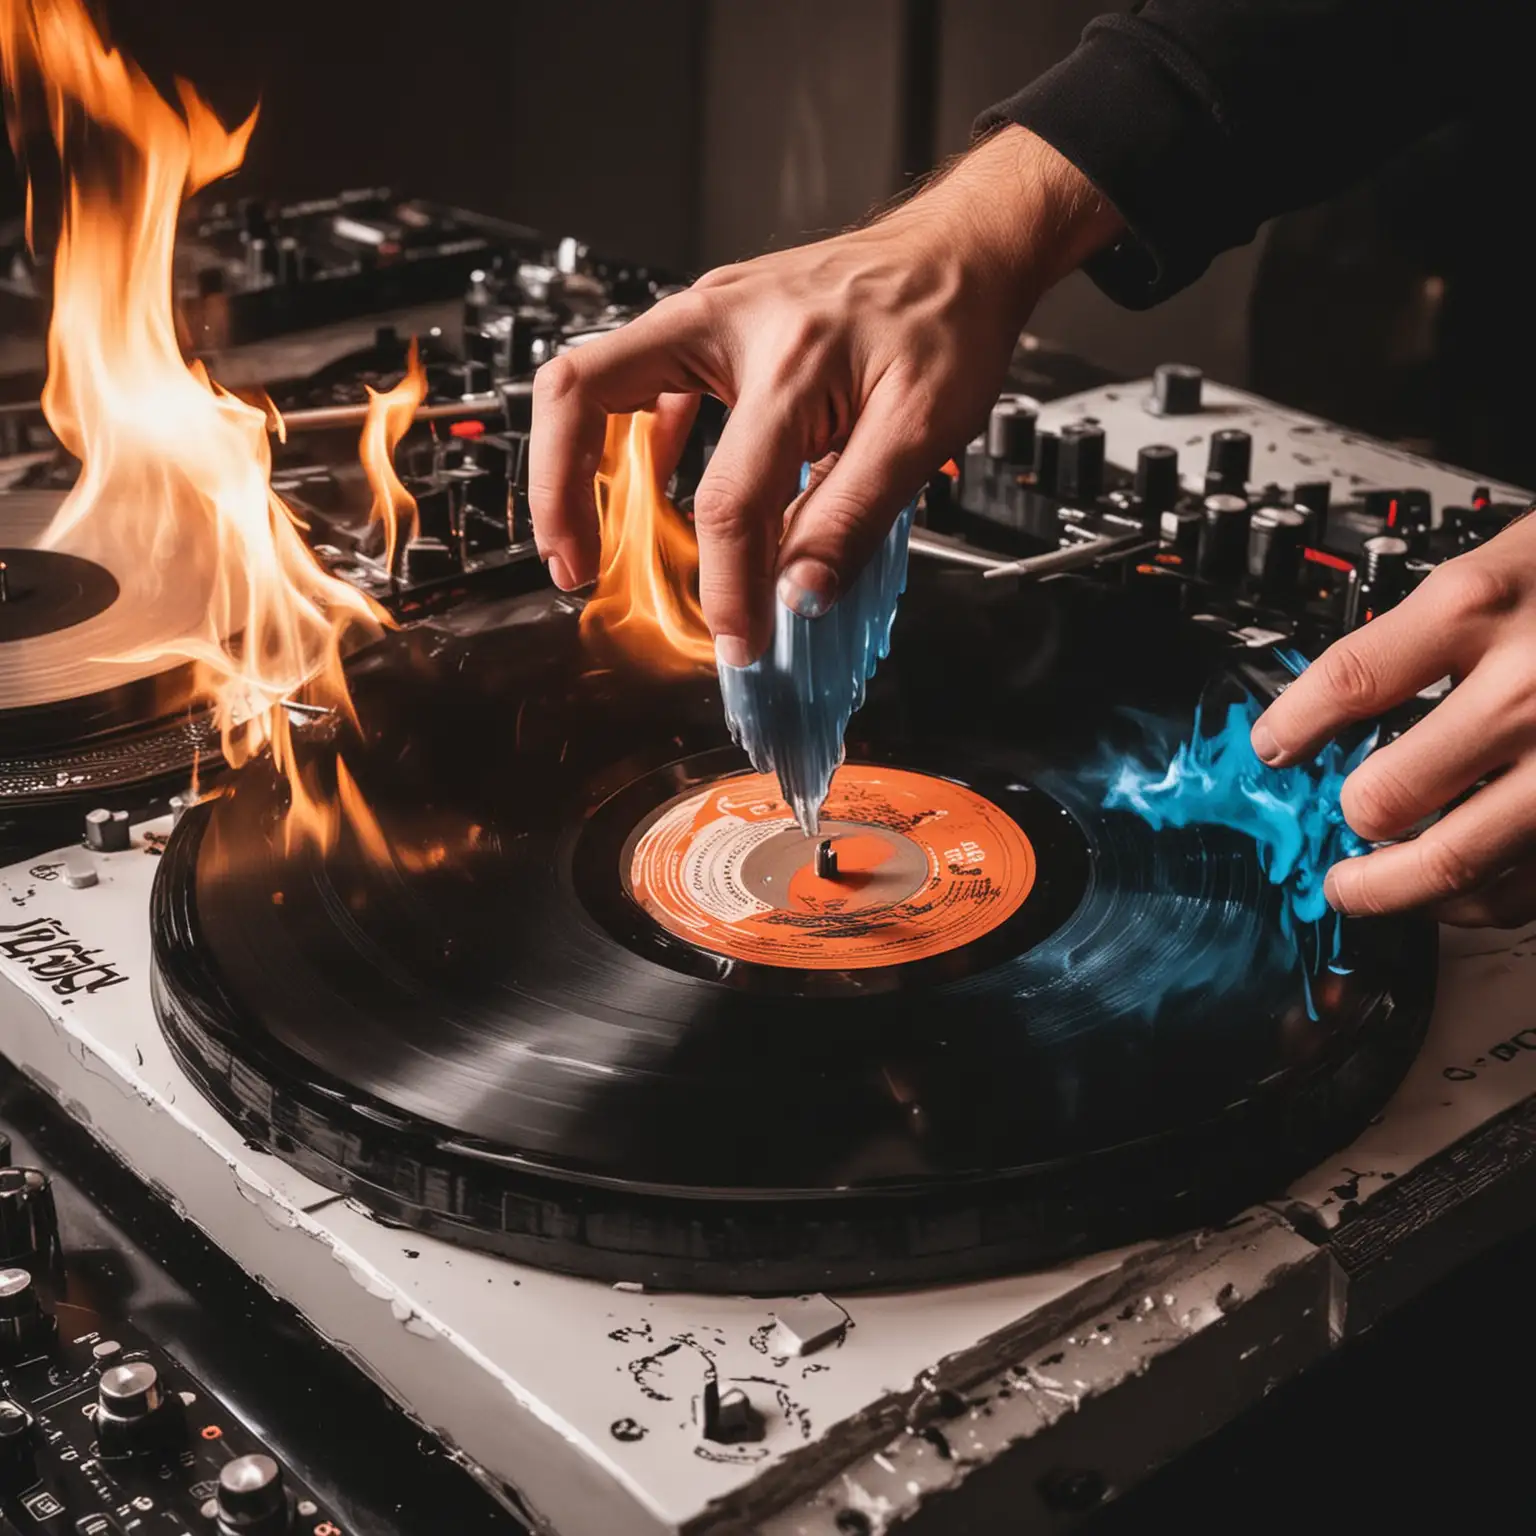 DJ Scratching Vinyl Record with Fire and Ice